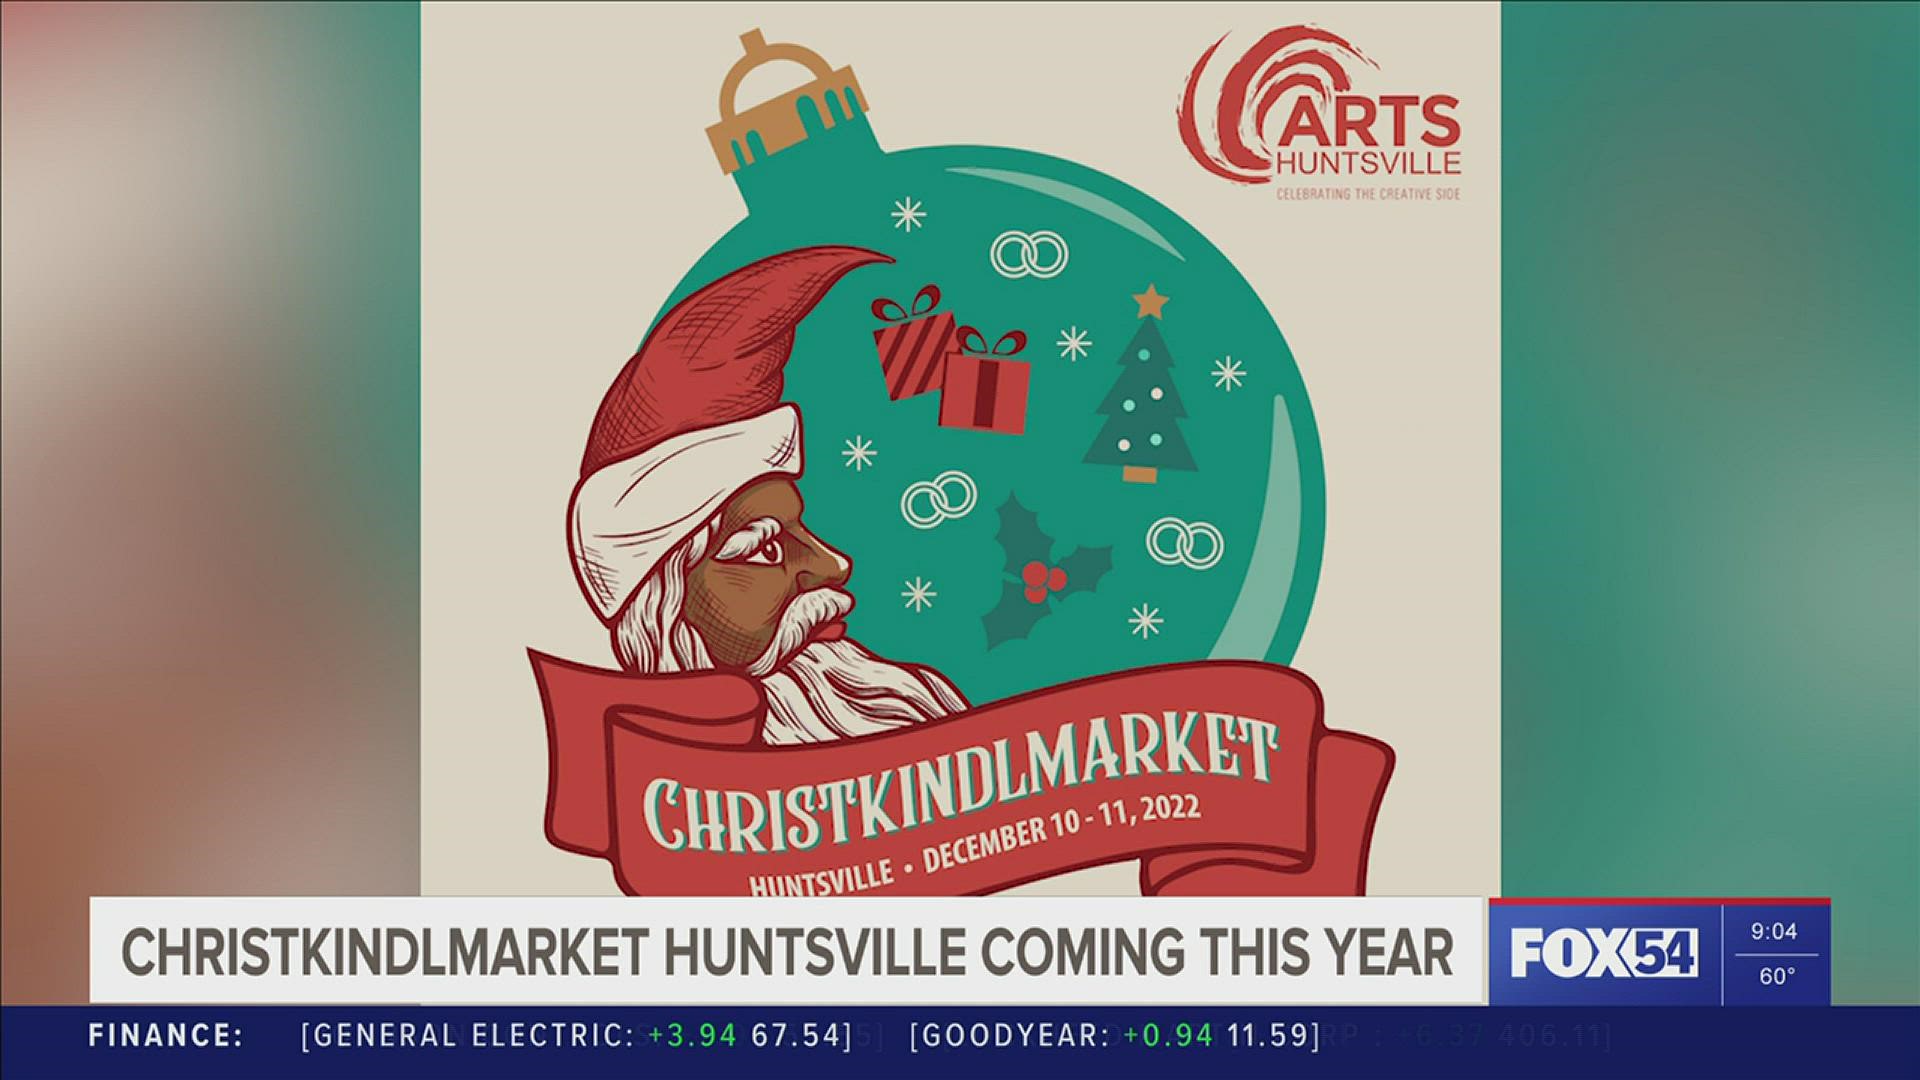 The new ChristKindlMarket Huntsville will feature a unique shopping experience with over 60 juried artists featured alongside a blend of holiday.